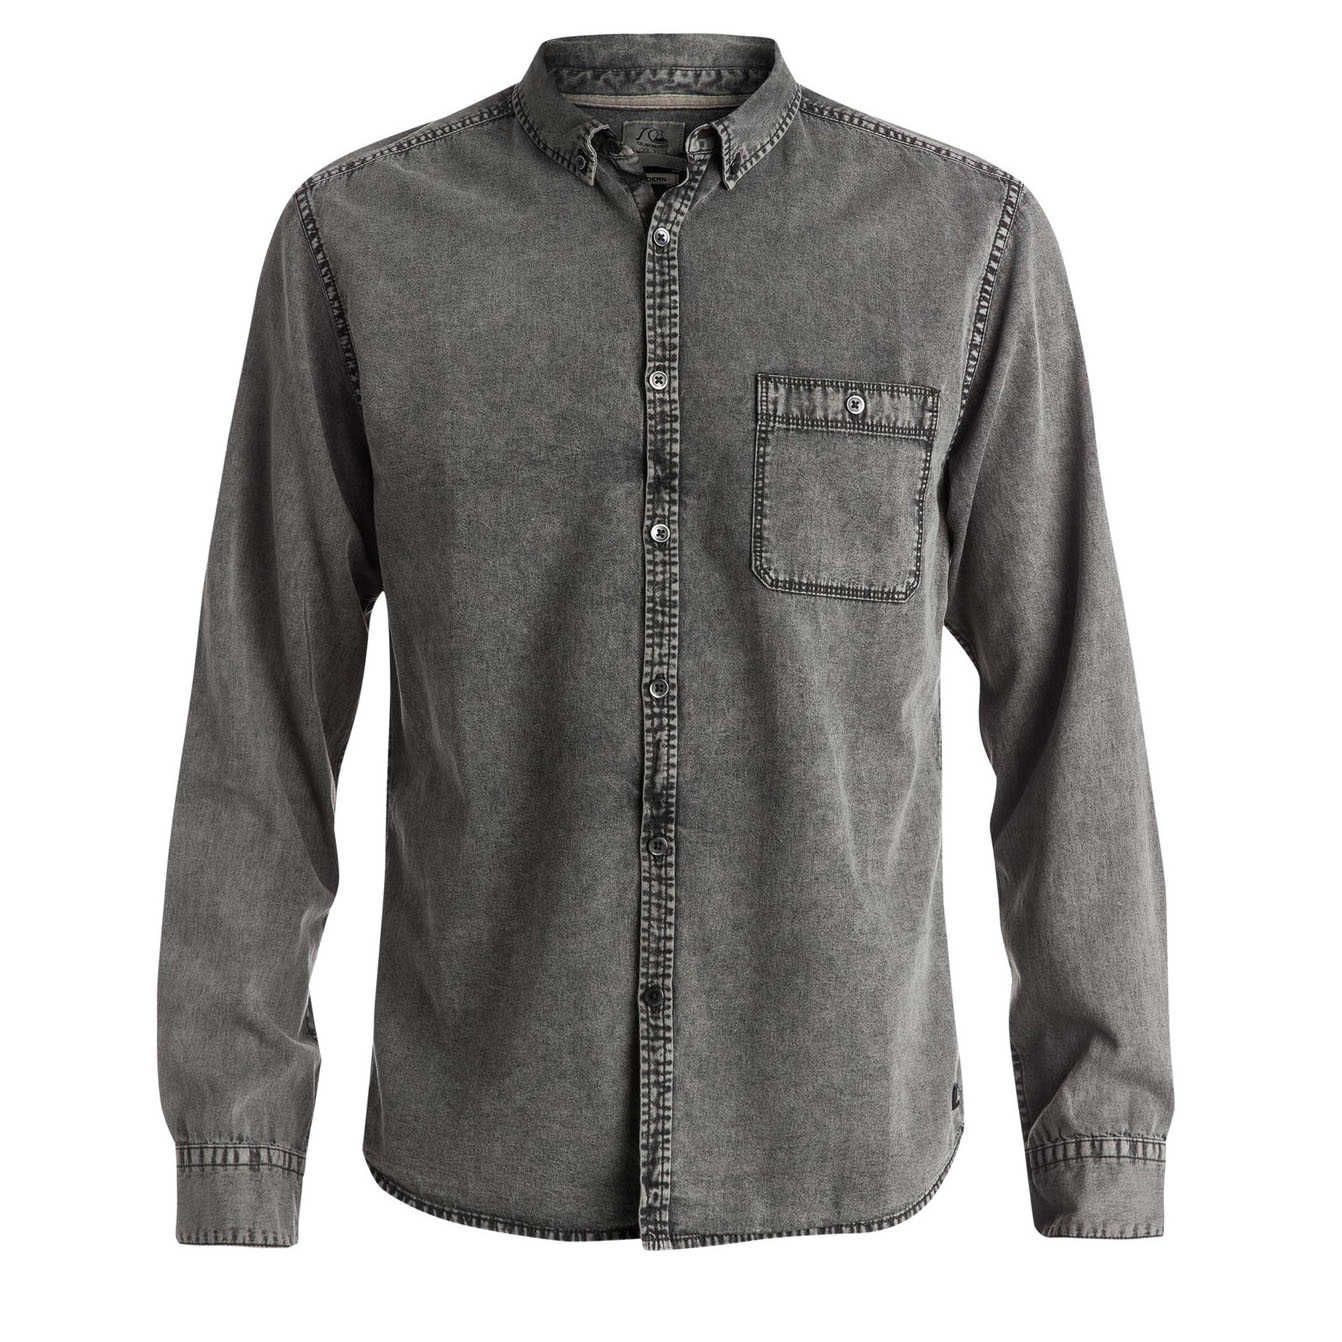 Chemise manches longues - The Clackton - Steeple Gray